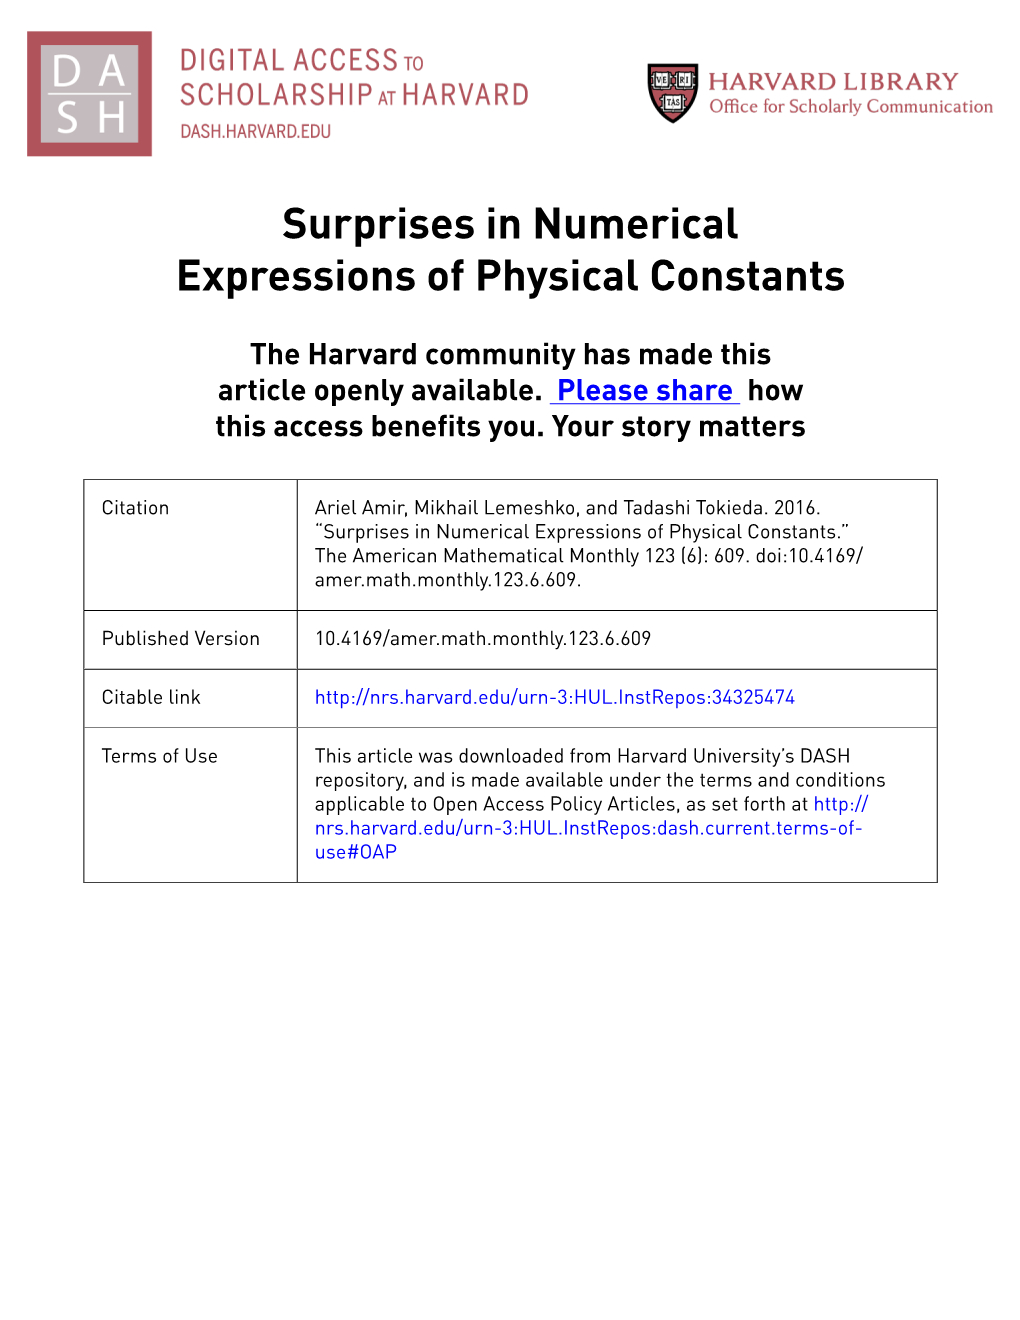 Surprises in Numerical Expressions of Physical Constants